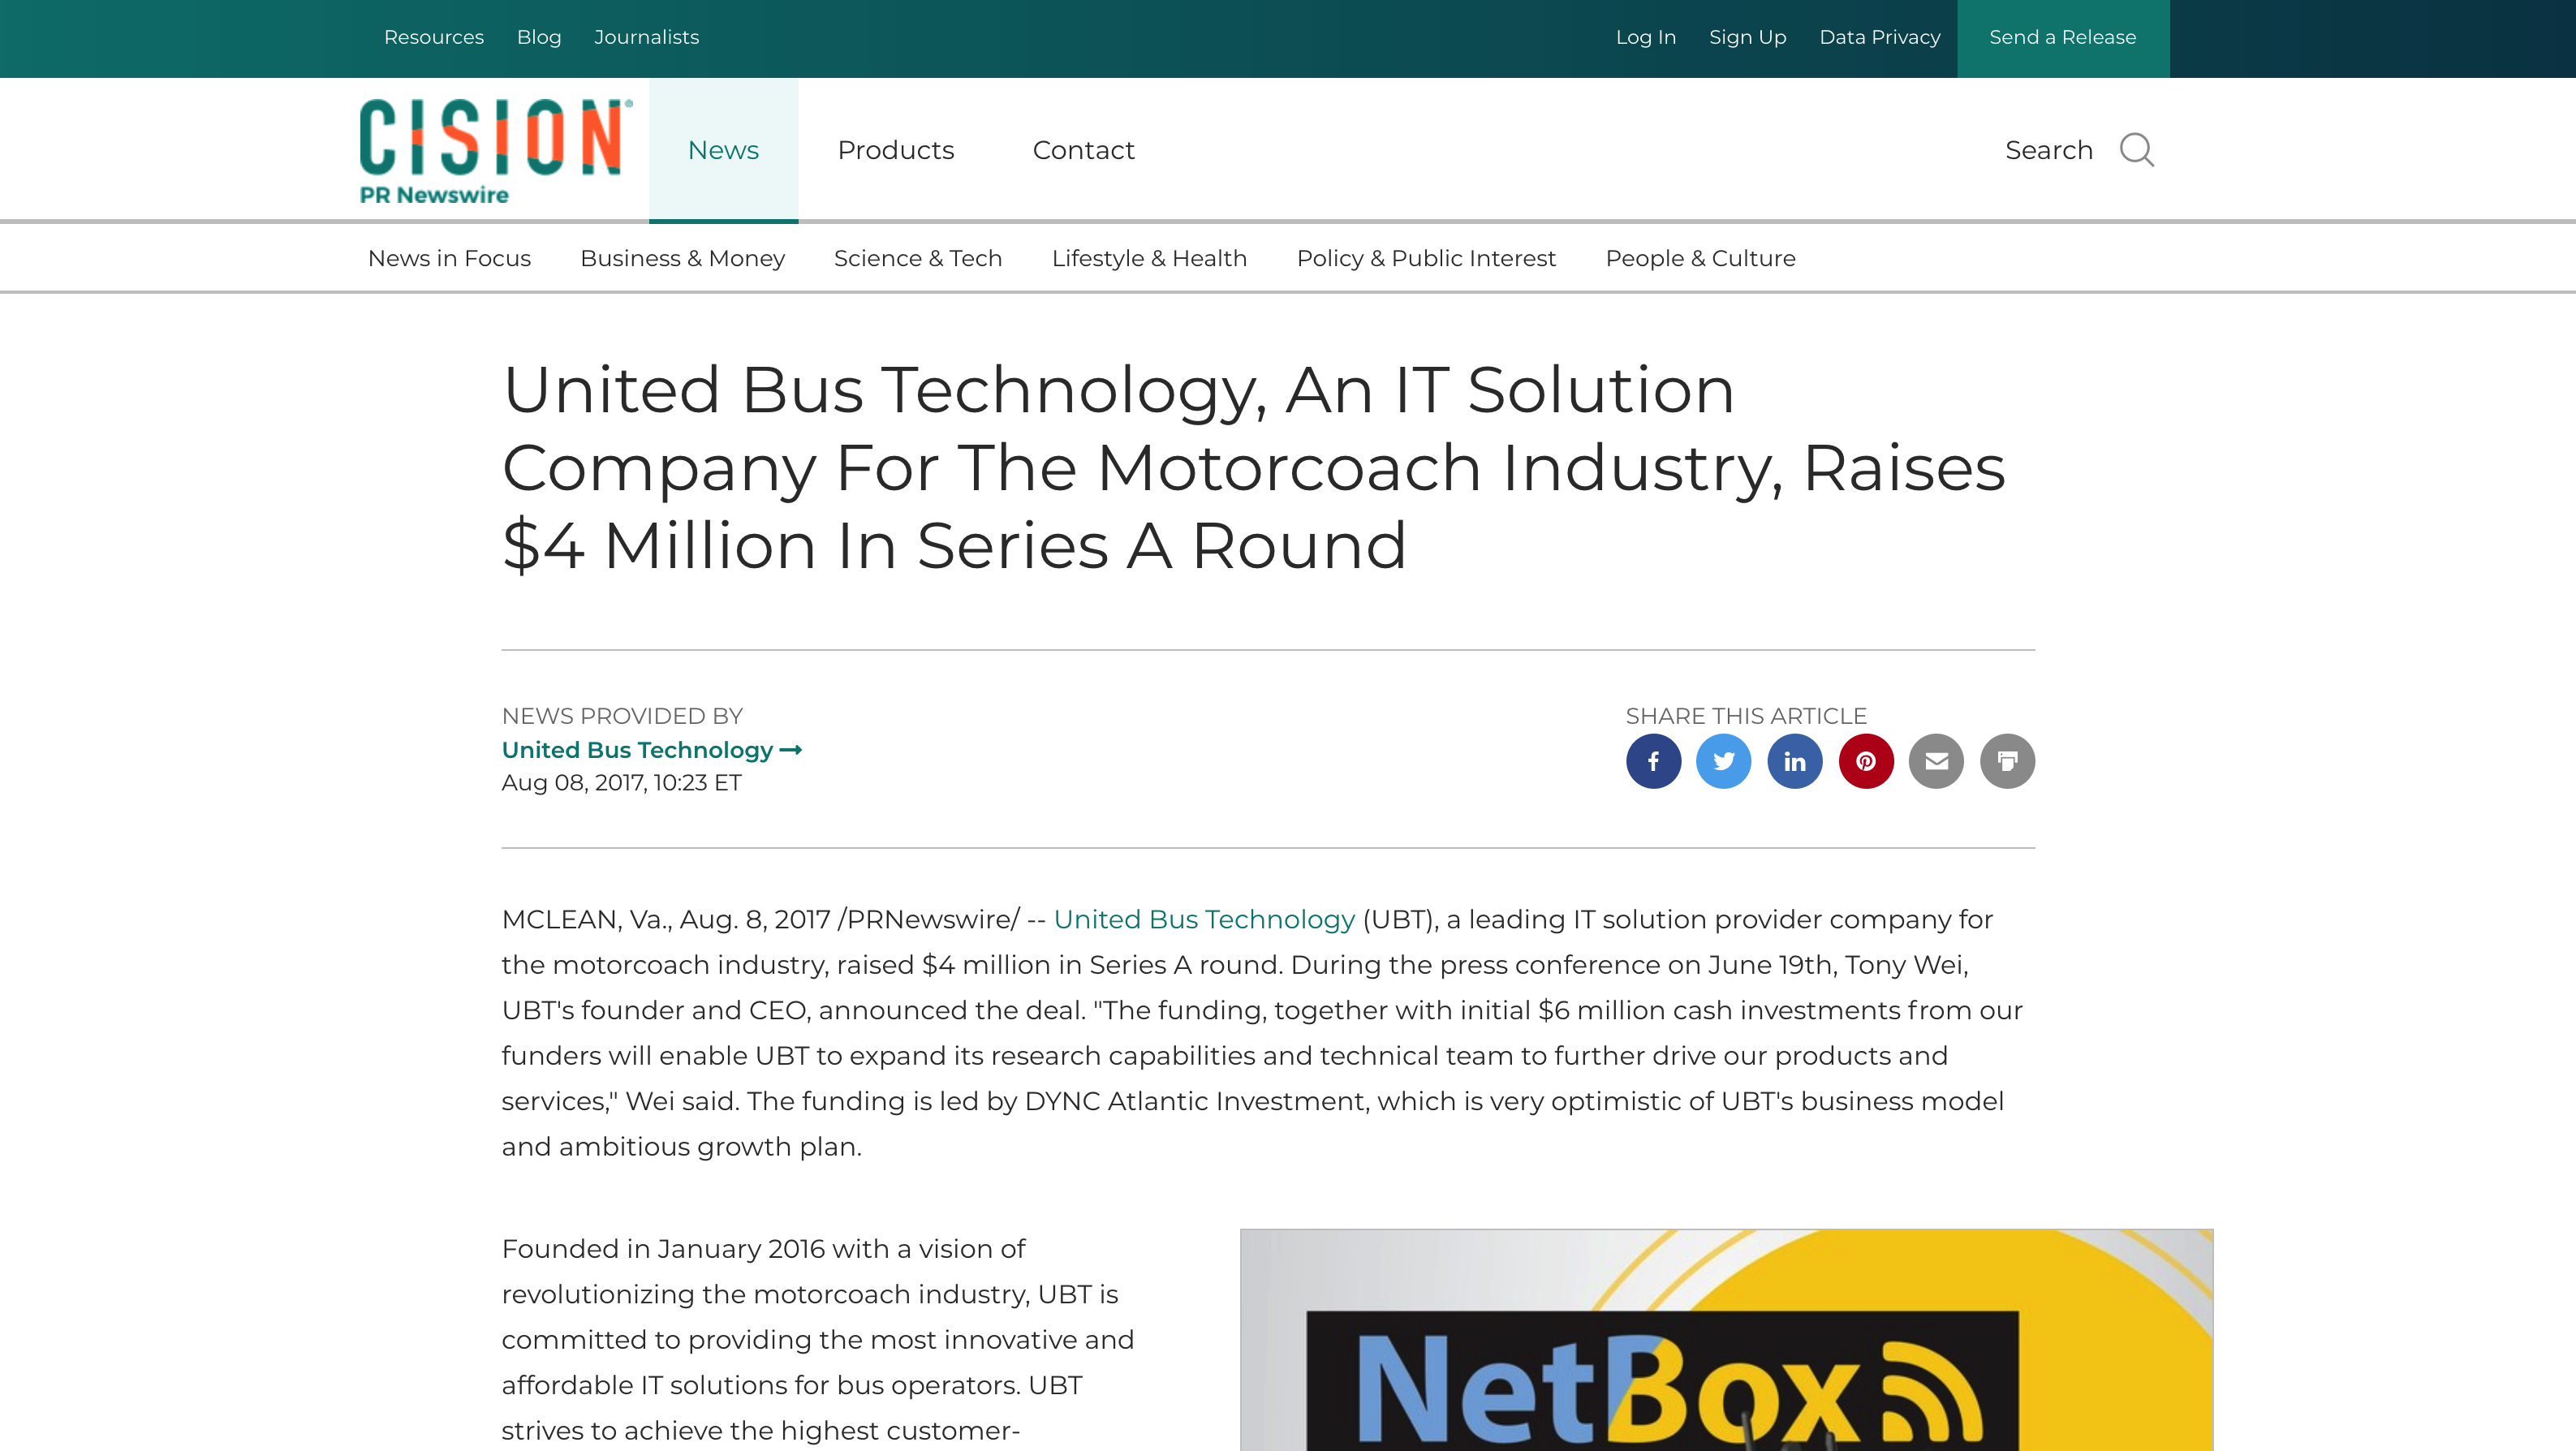 United Bus Technology, An IT Solution Company For The Motorcoach Industry, Raises $4 Million In Series A Round